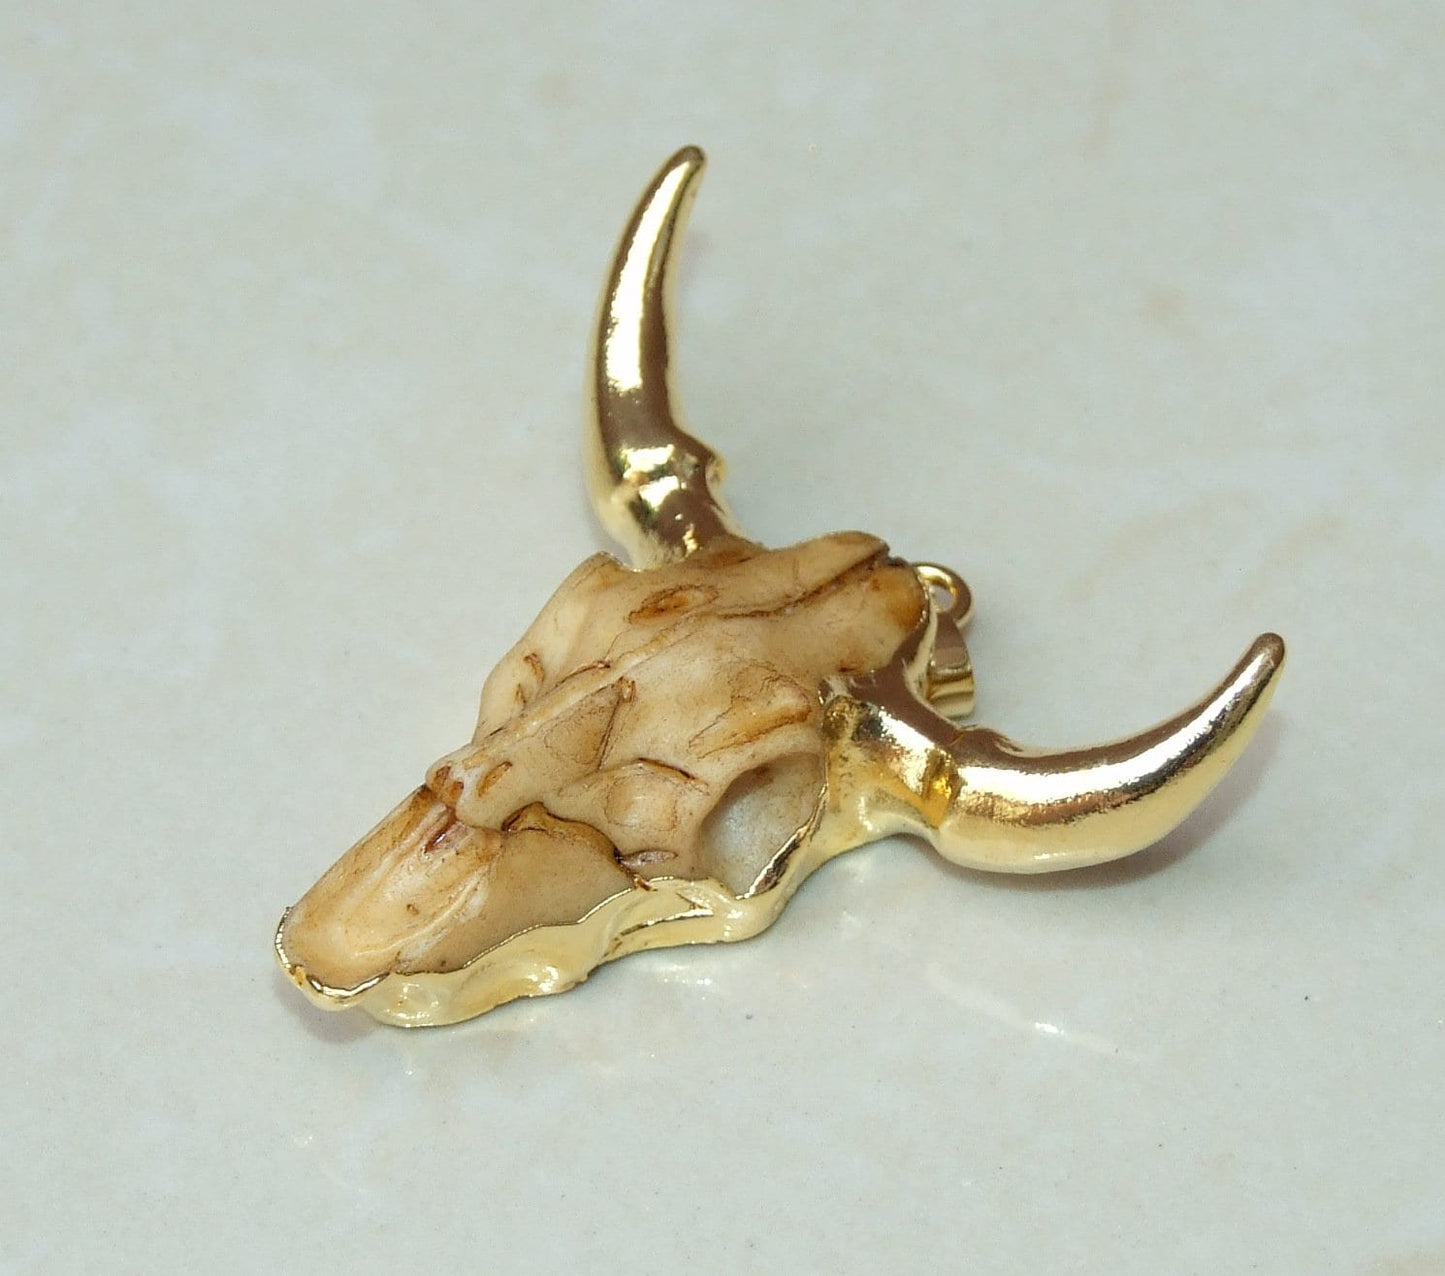 Gold Plated Longhorn Cattle Skull Pendant - Skull Pendant - Buffalo Skull Pendant - Cow Horn - Charm- Gold Plated - 45mm x 45mm